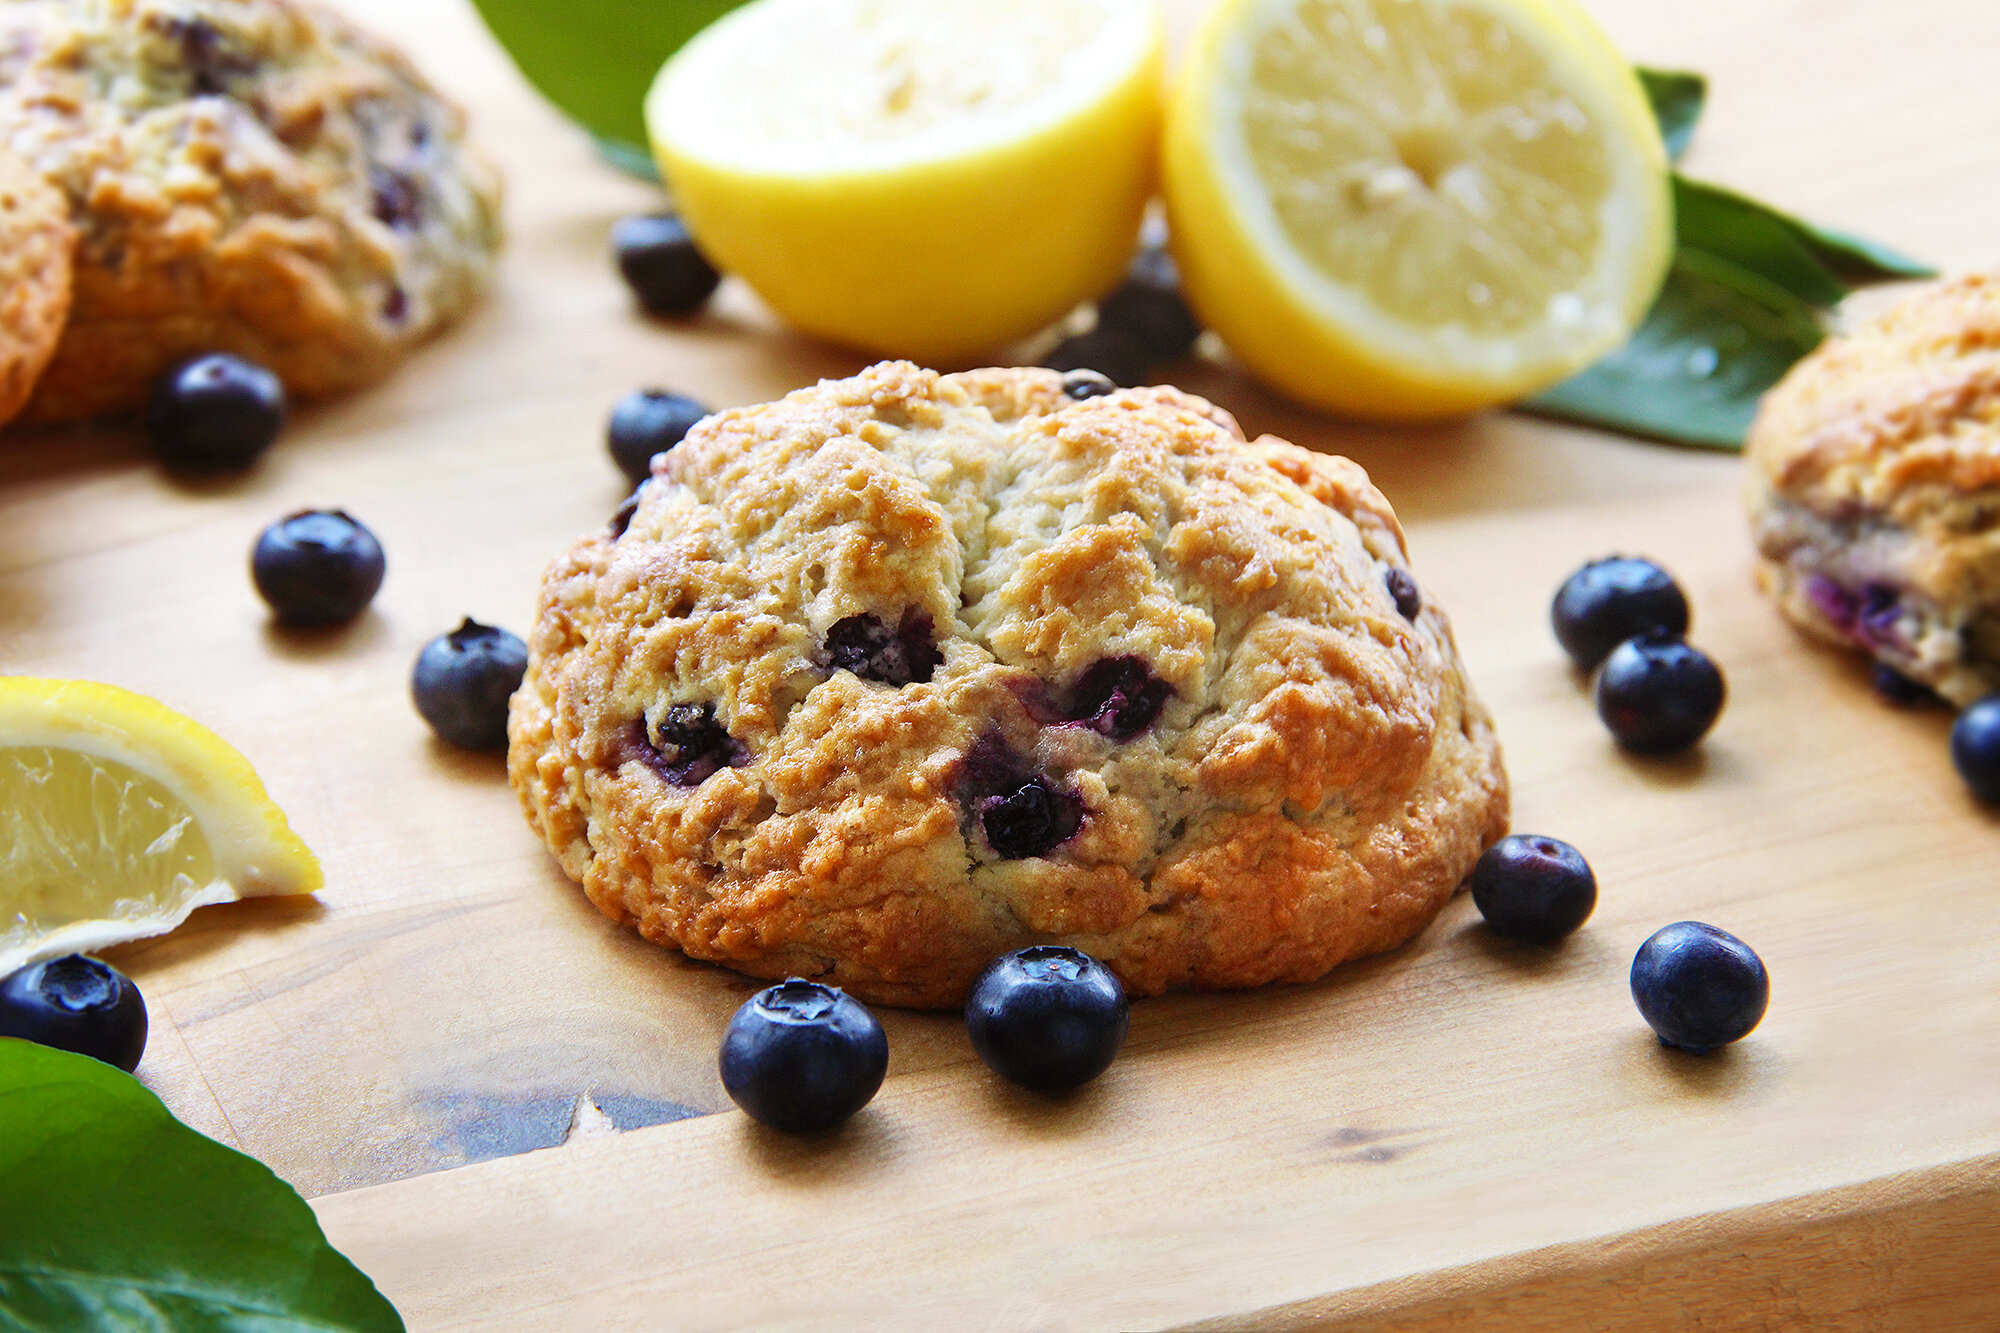 blueberry-scone-with-blueberries-and-lemons.jpg